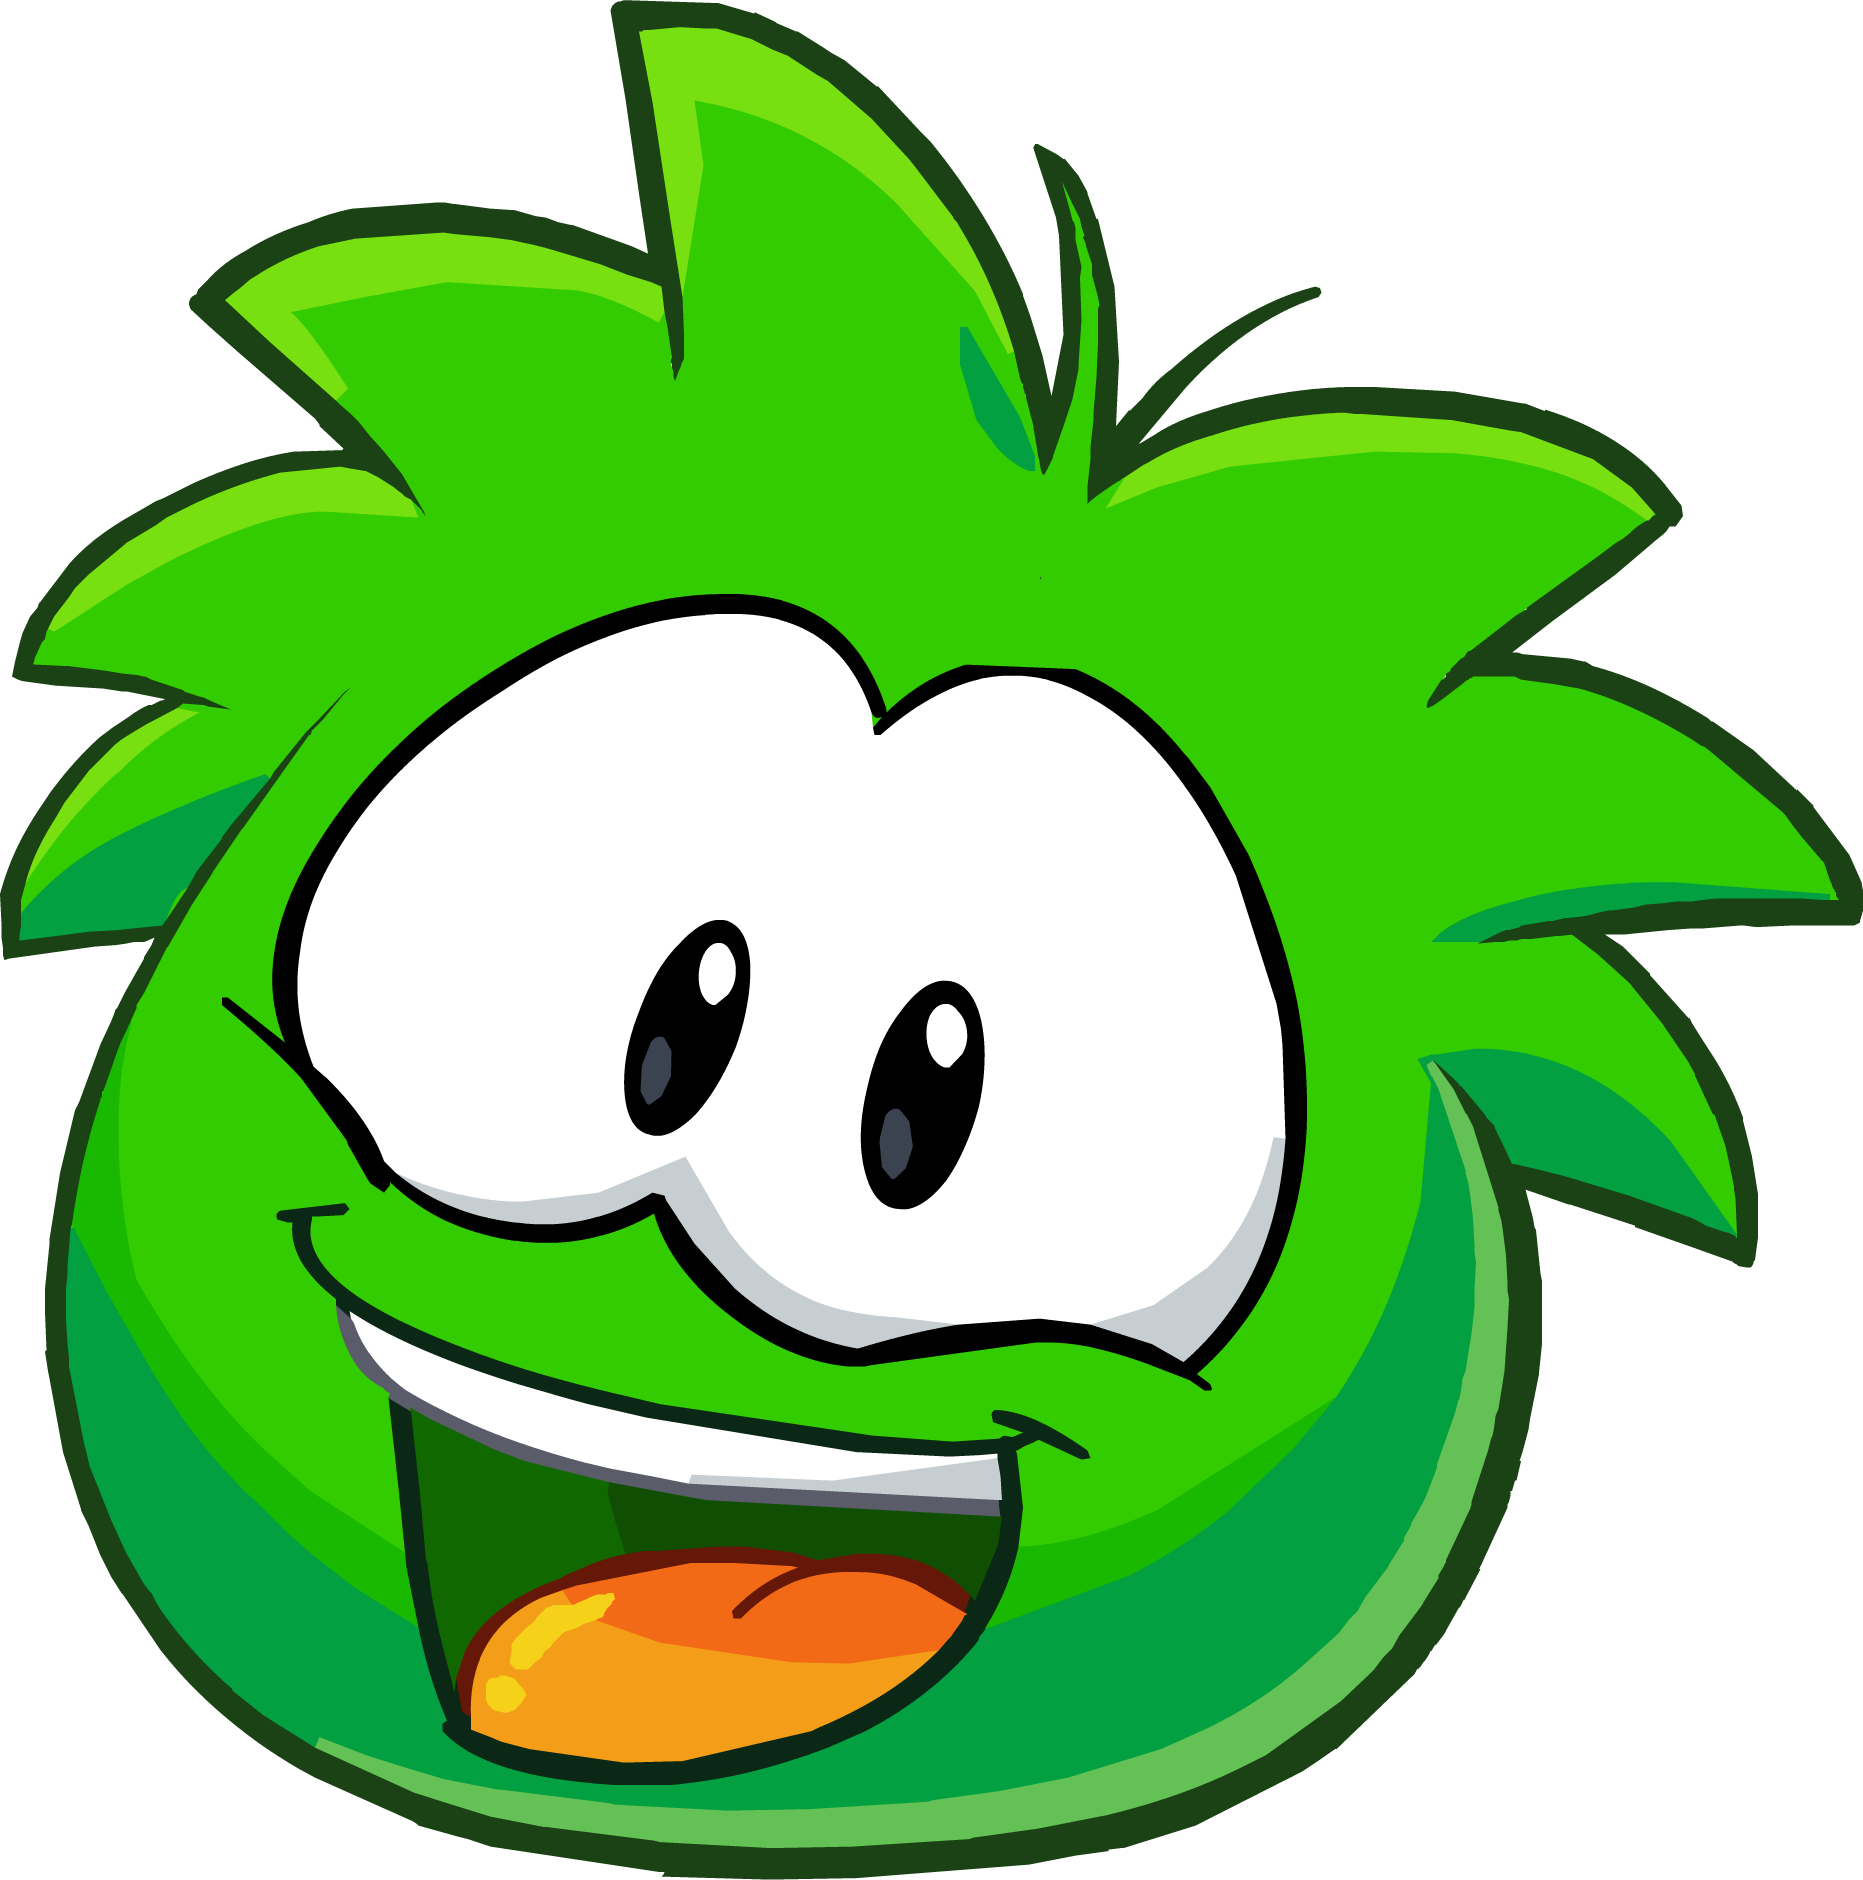 Keeper Of The Boiler Room - Club Penguin Green Puffle (1863x1880)